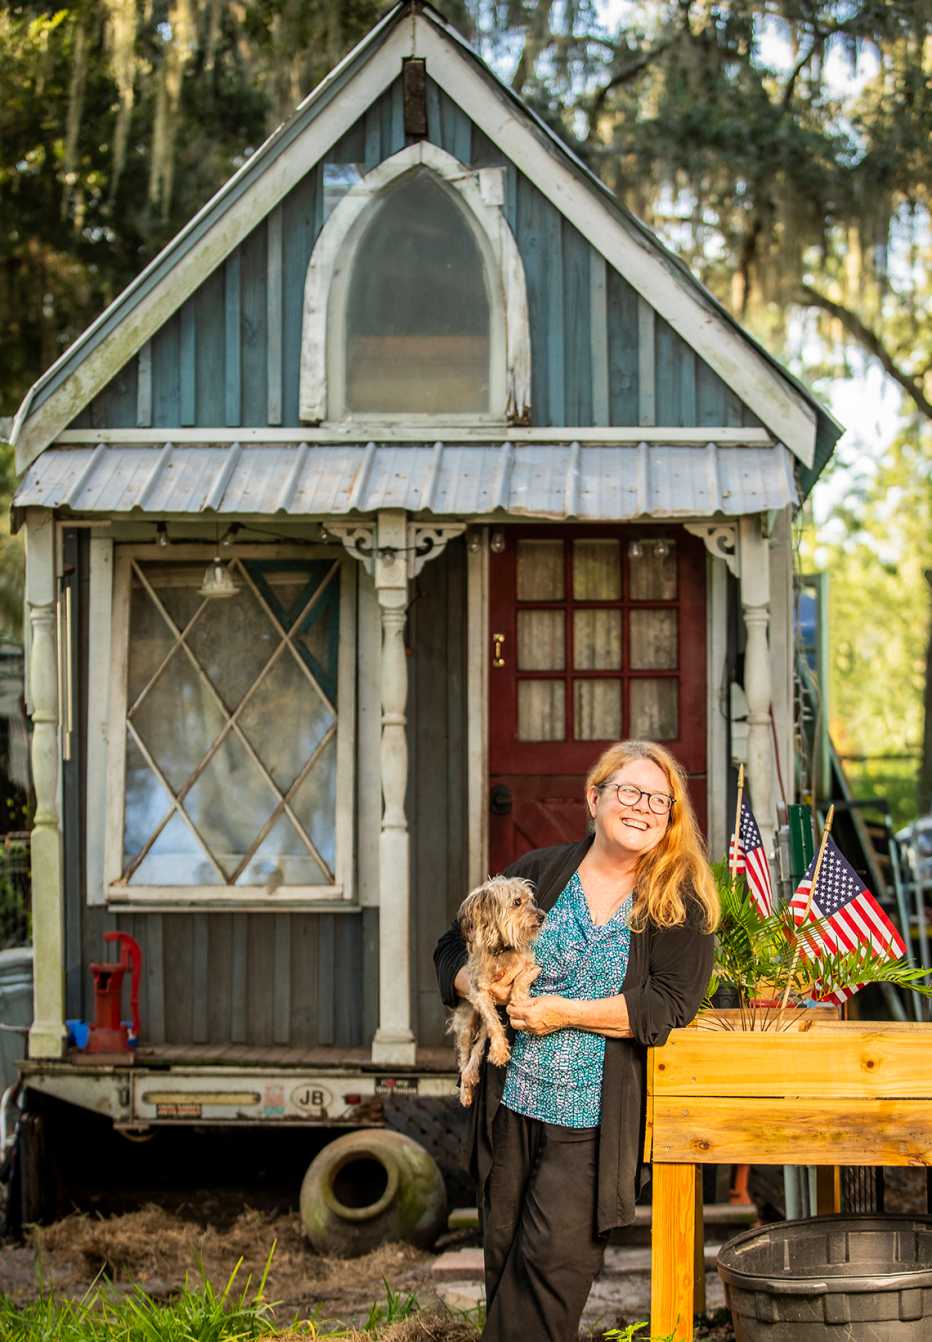 shorty robbins stands outside her tiny home with her dog